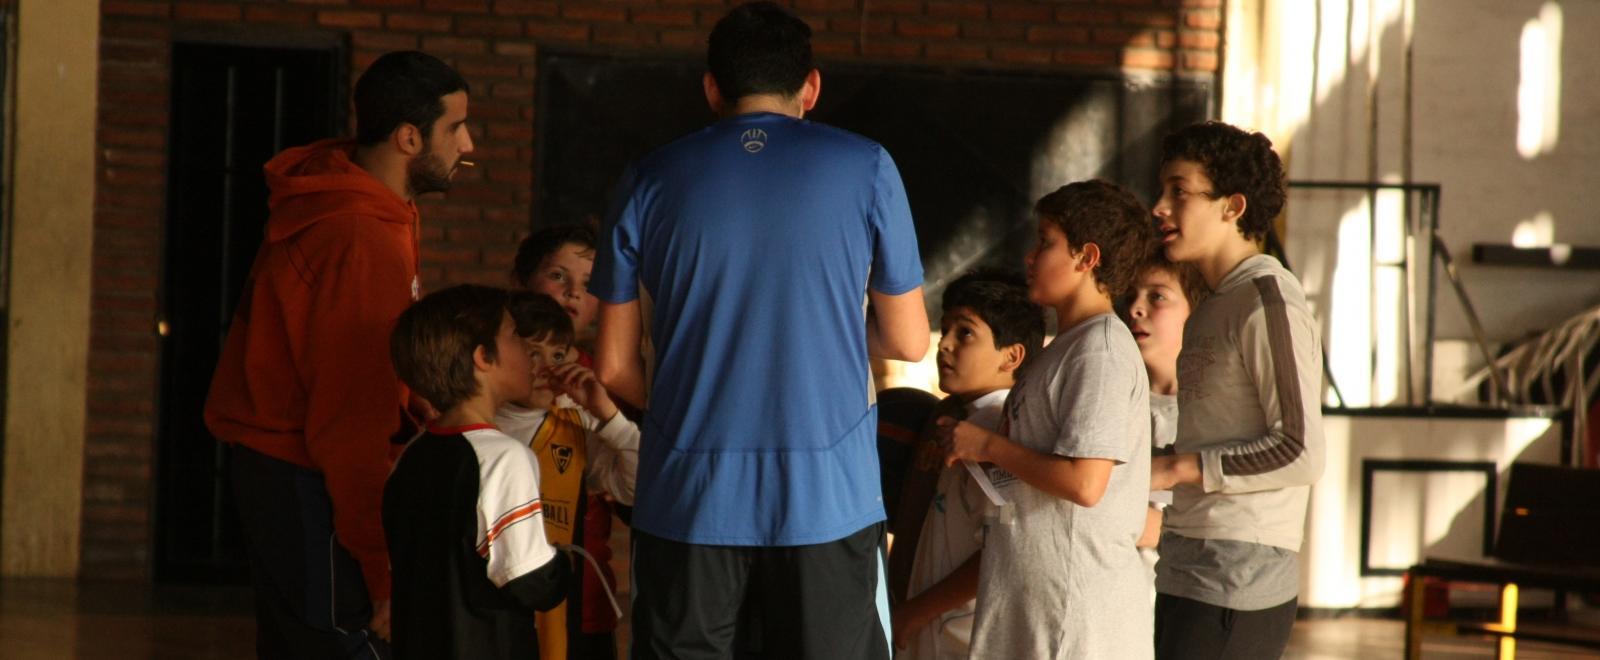 A sports player meets with his team as part of his volunteer sports coaching in Argentina